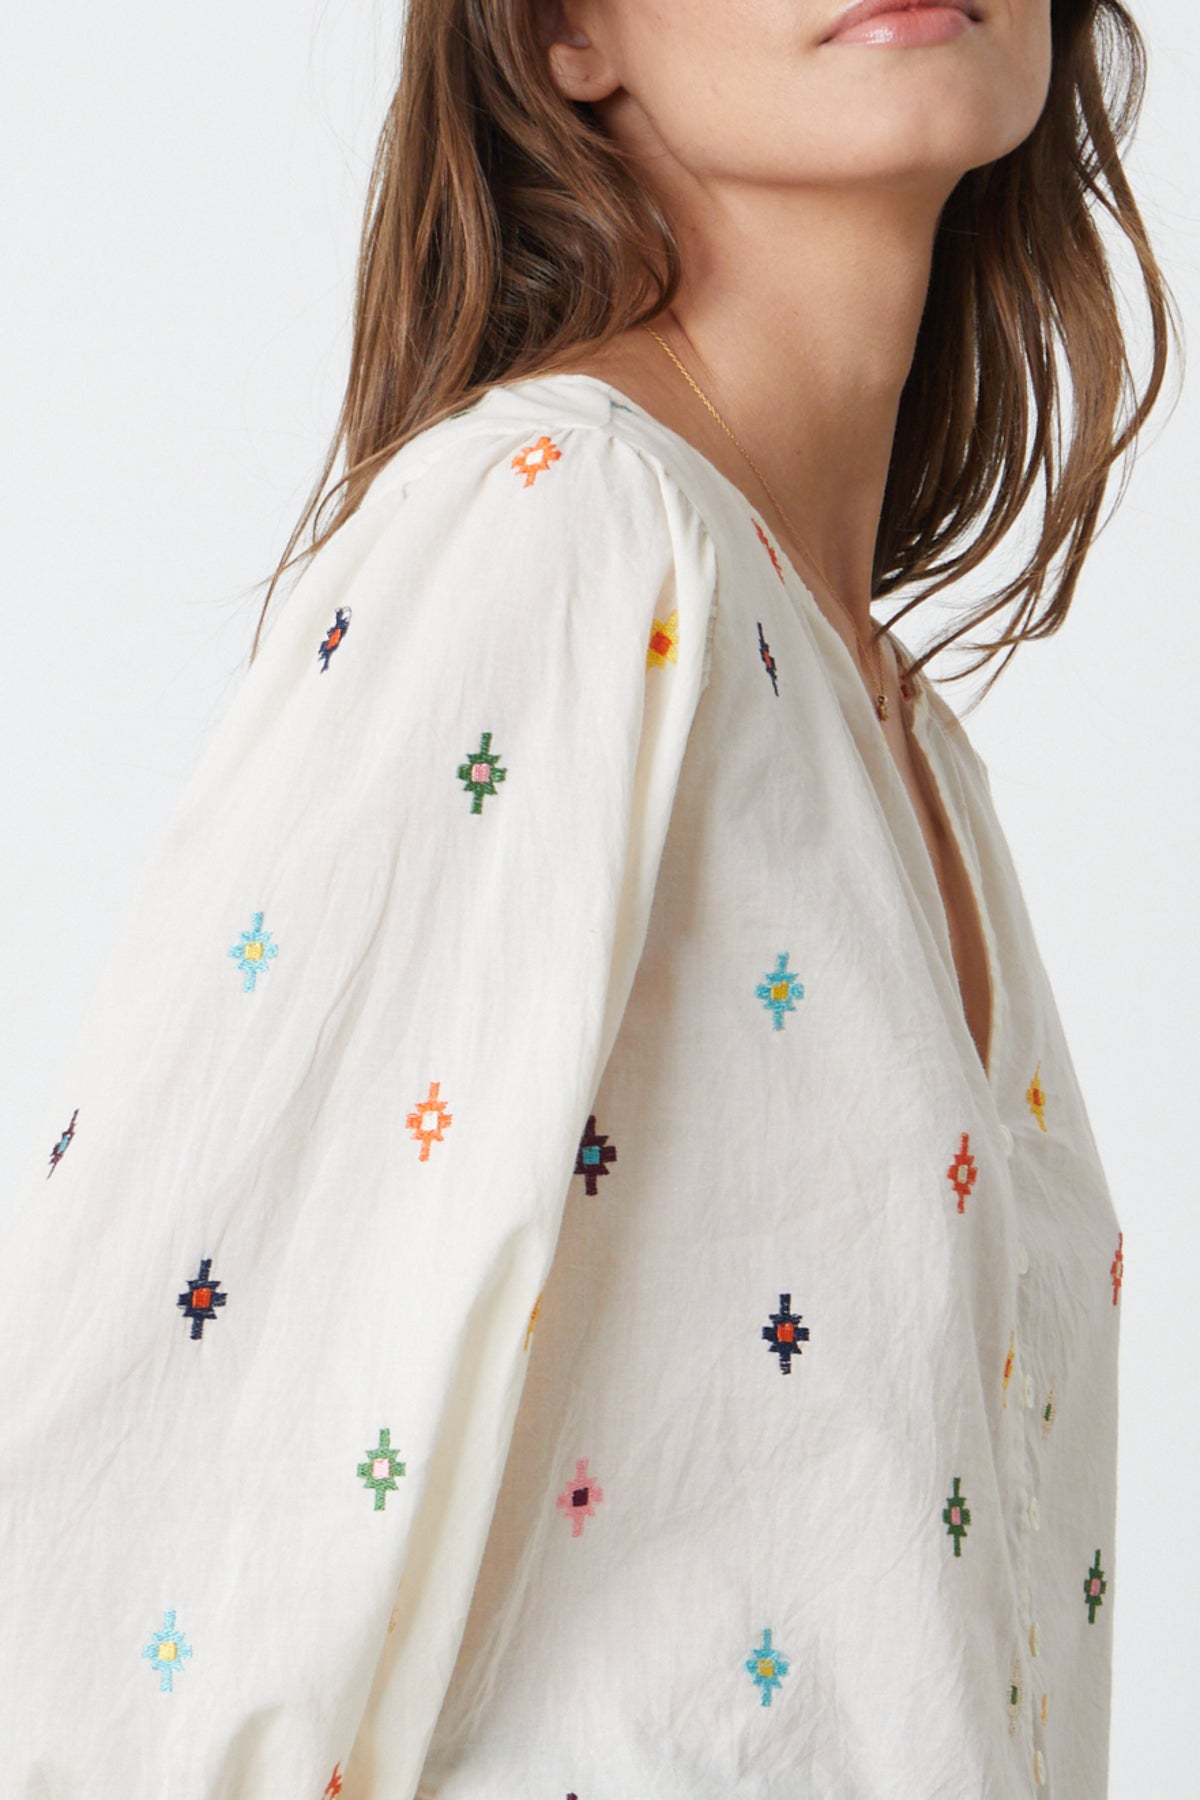   The model is wearing a white Velvet by Graham & Spencer blouse with multi - colored embroidery close up detail 